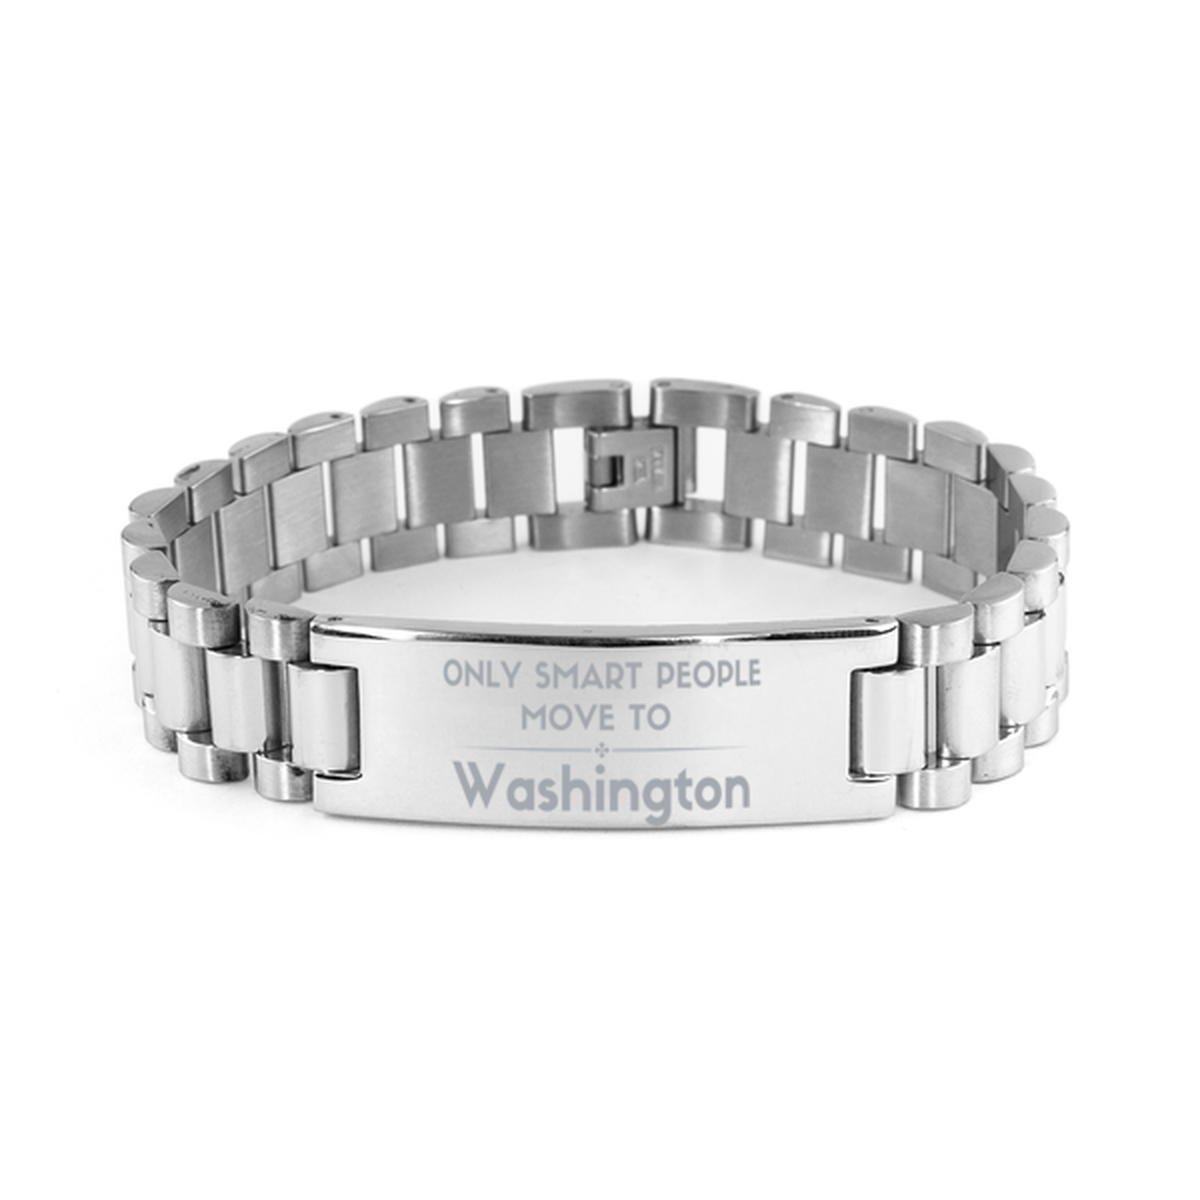 Only smart people move to Washington Ladder Stainless Steel Bracelet, Gag Gifts For Washington, Move to Washington Gifts for Friends Coworker Funny Saying Quote